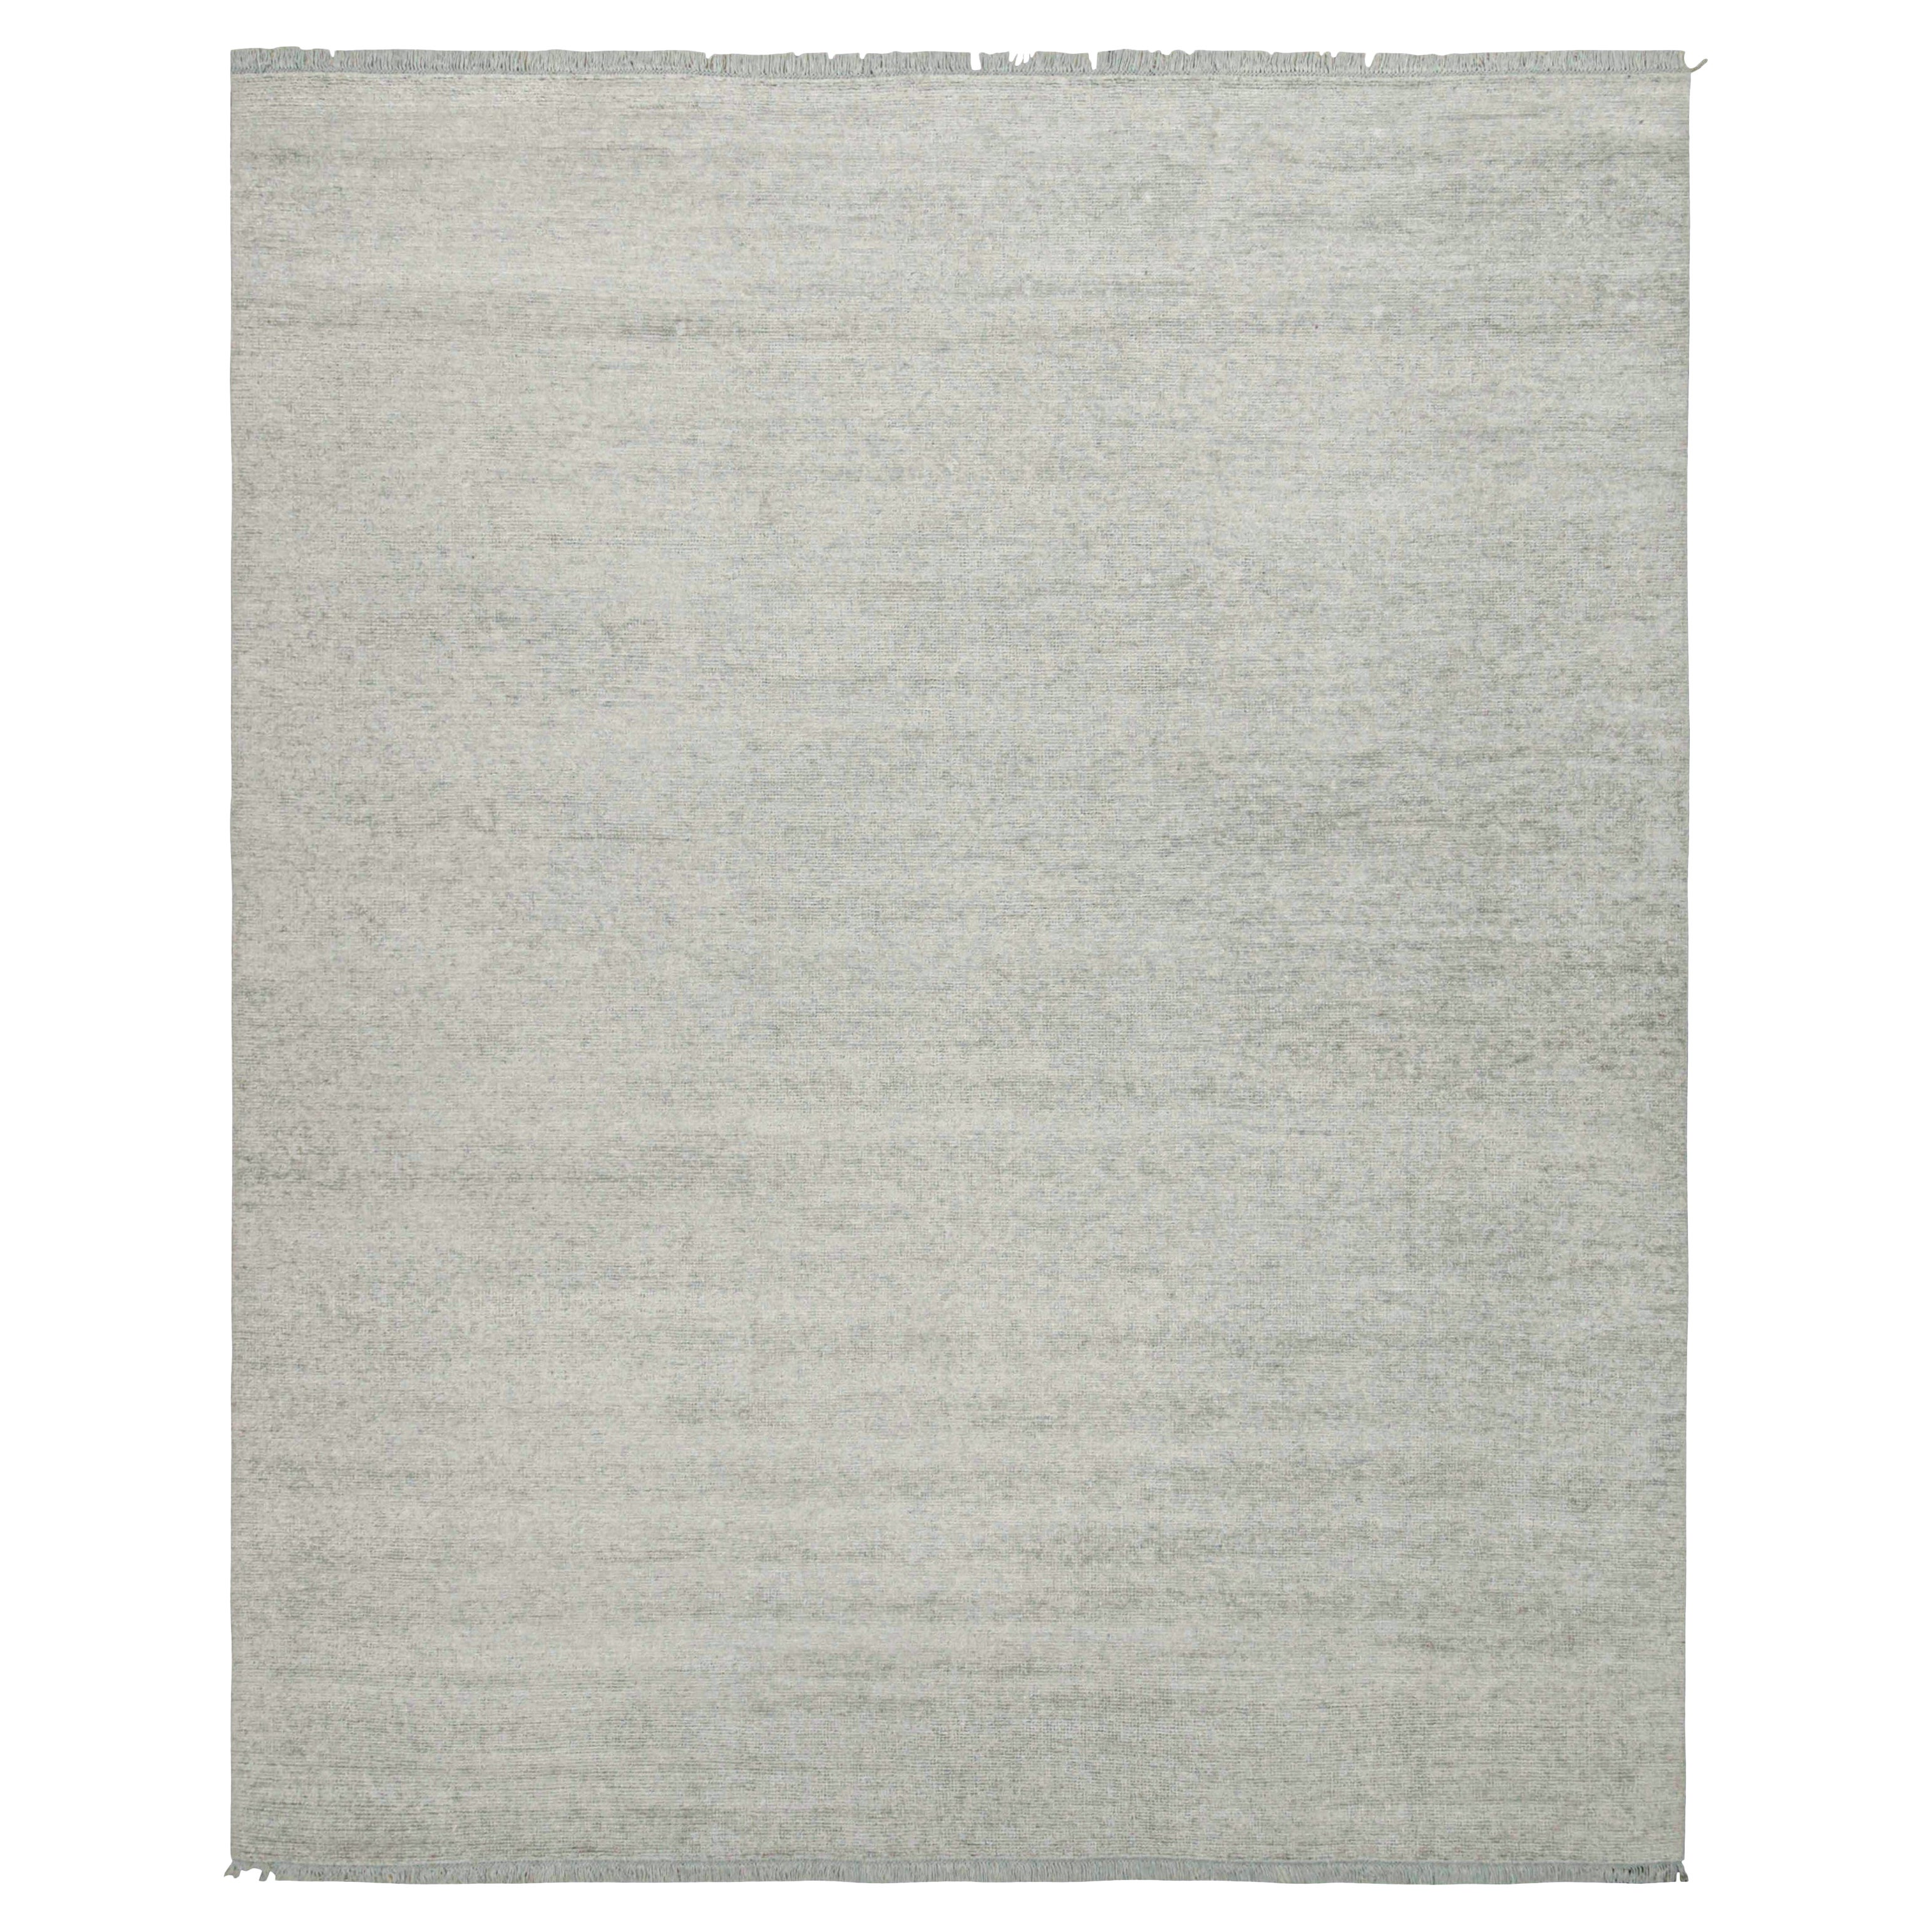 Rug & Kilim's Modern Rug in Solid Silver-Gray Tone-on-tone Striae (tapis moderne à rayures argentées et grises)